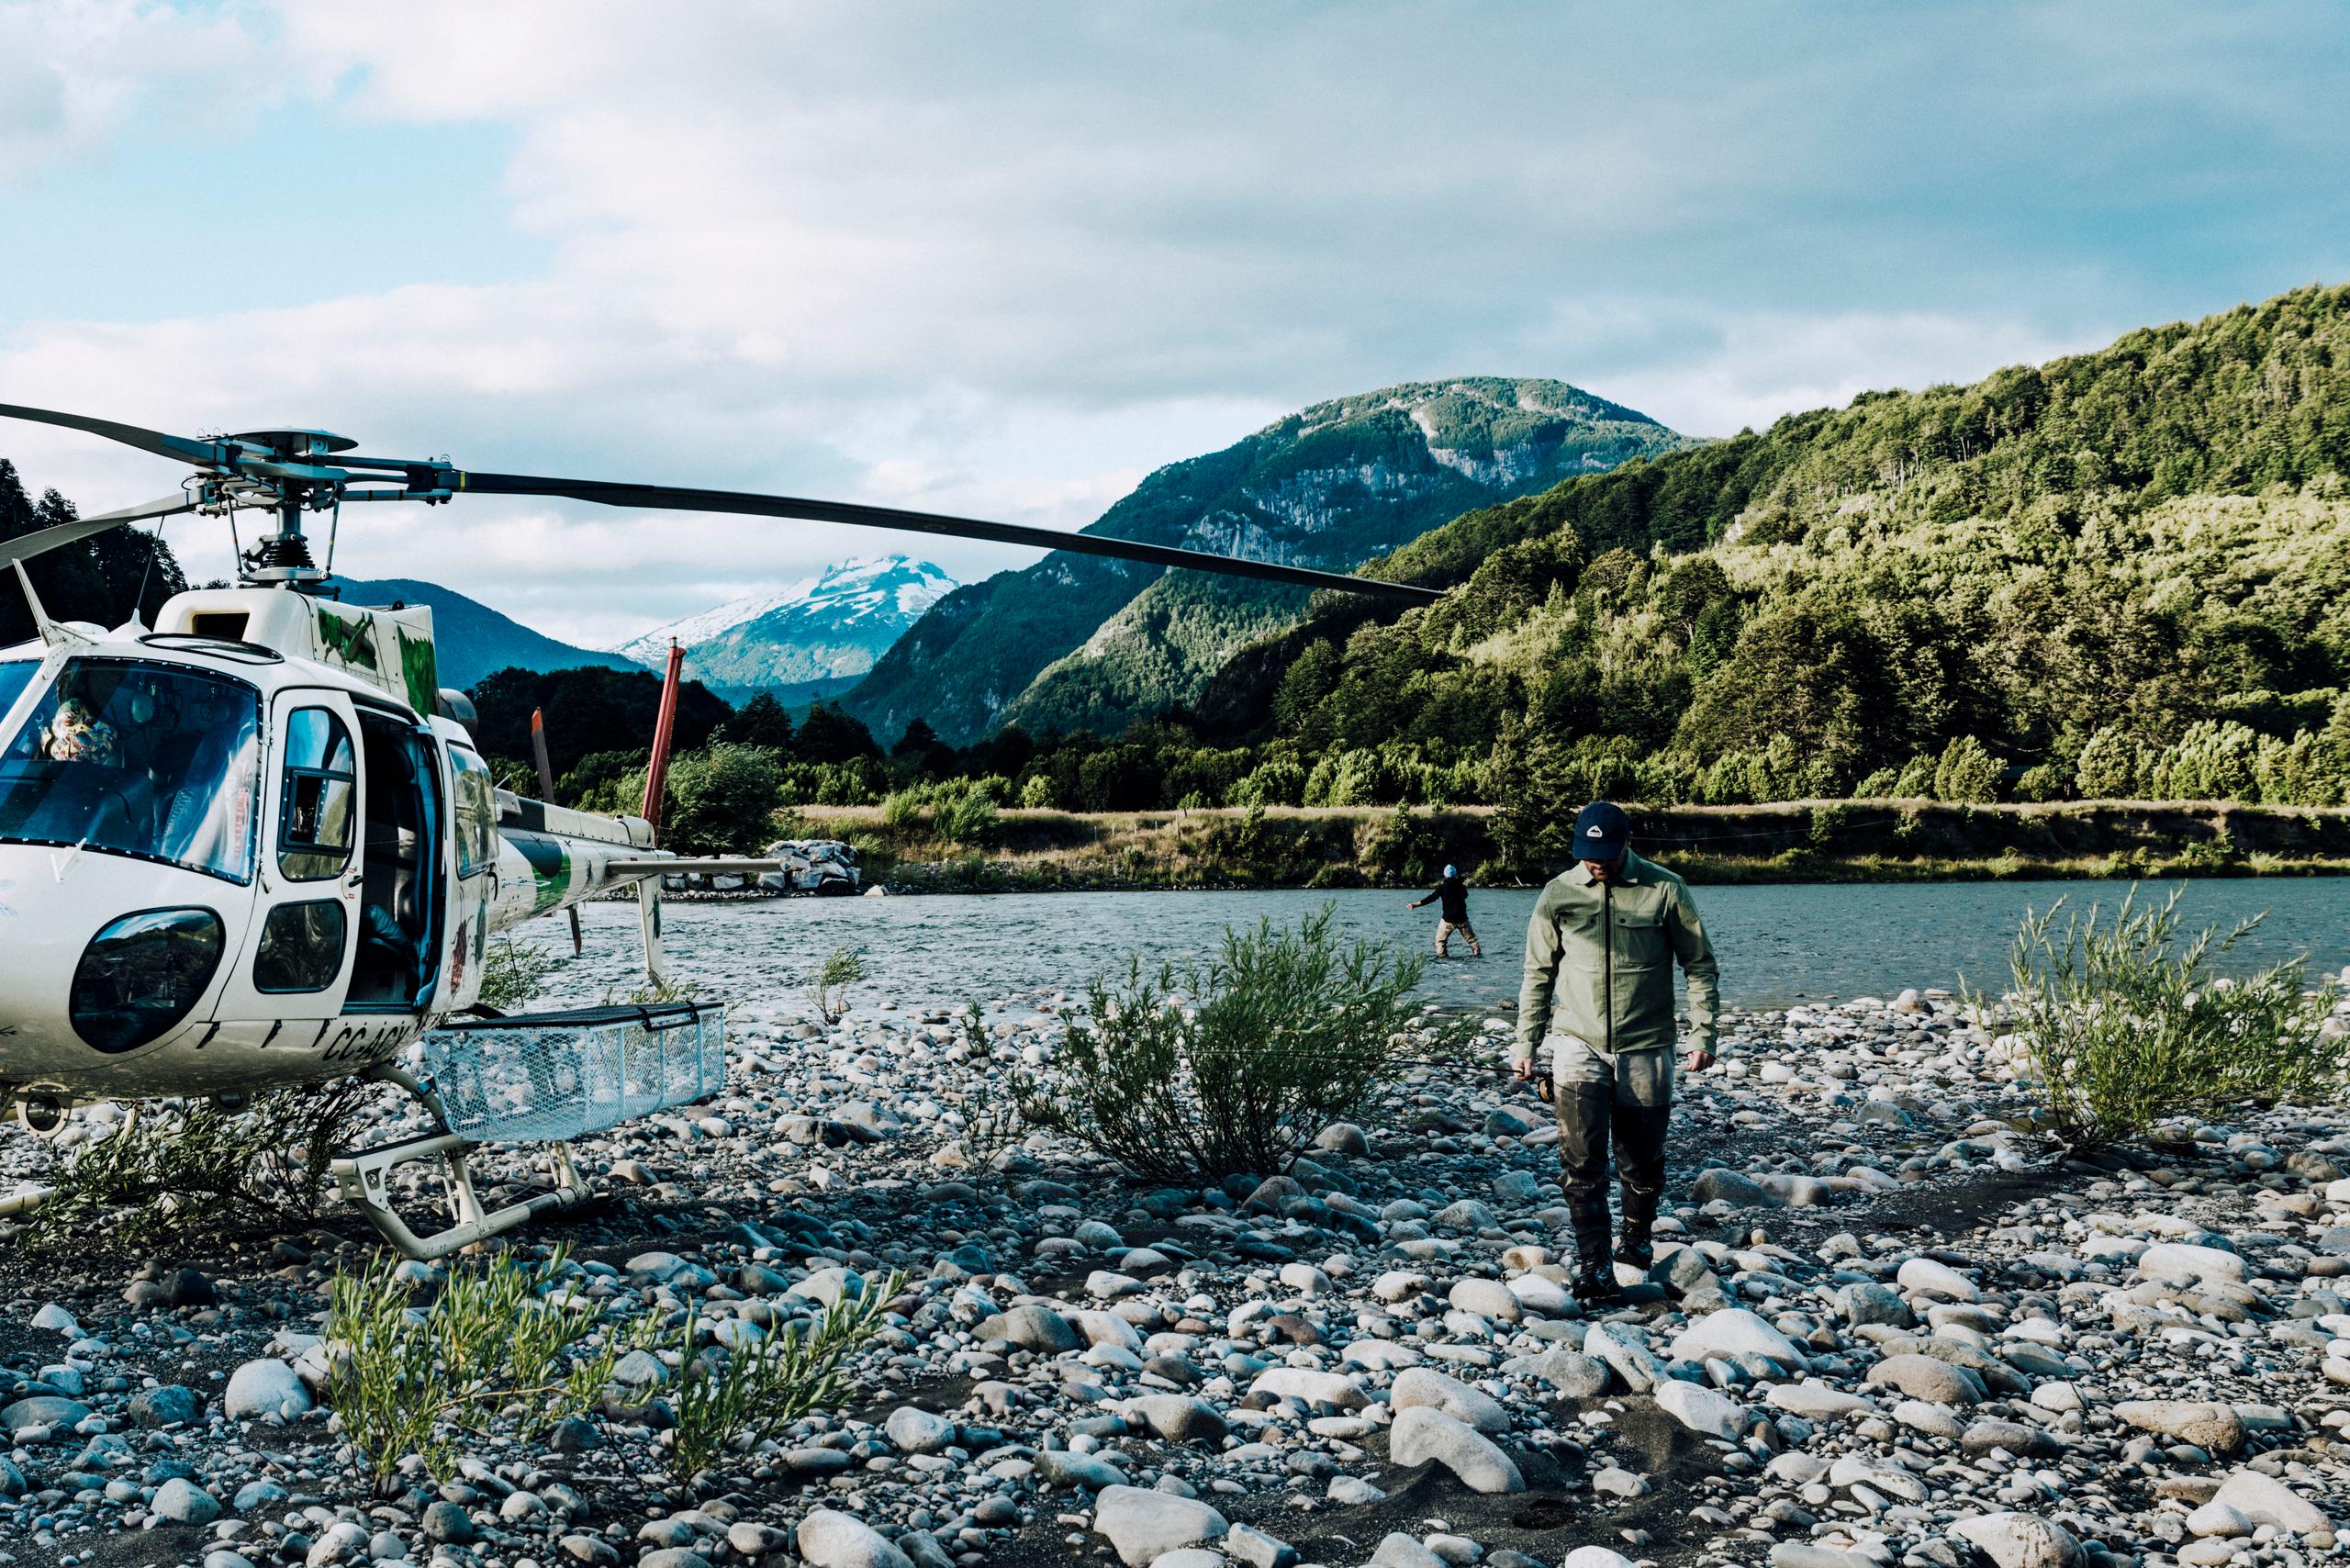 Man walking on rocky shore alongside Patagonia river with helicopter parked nearby